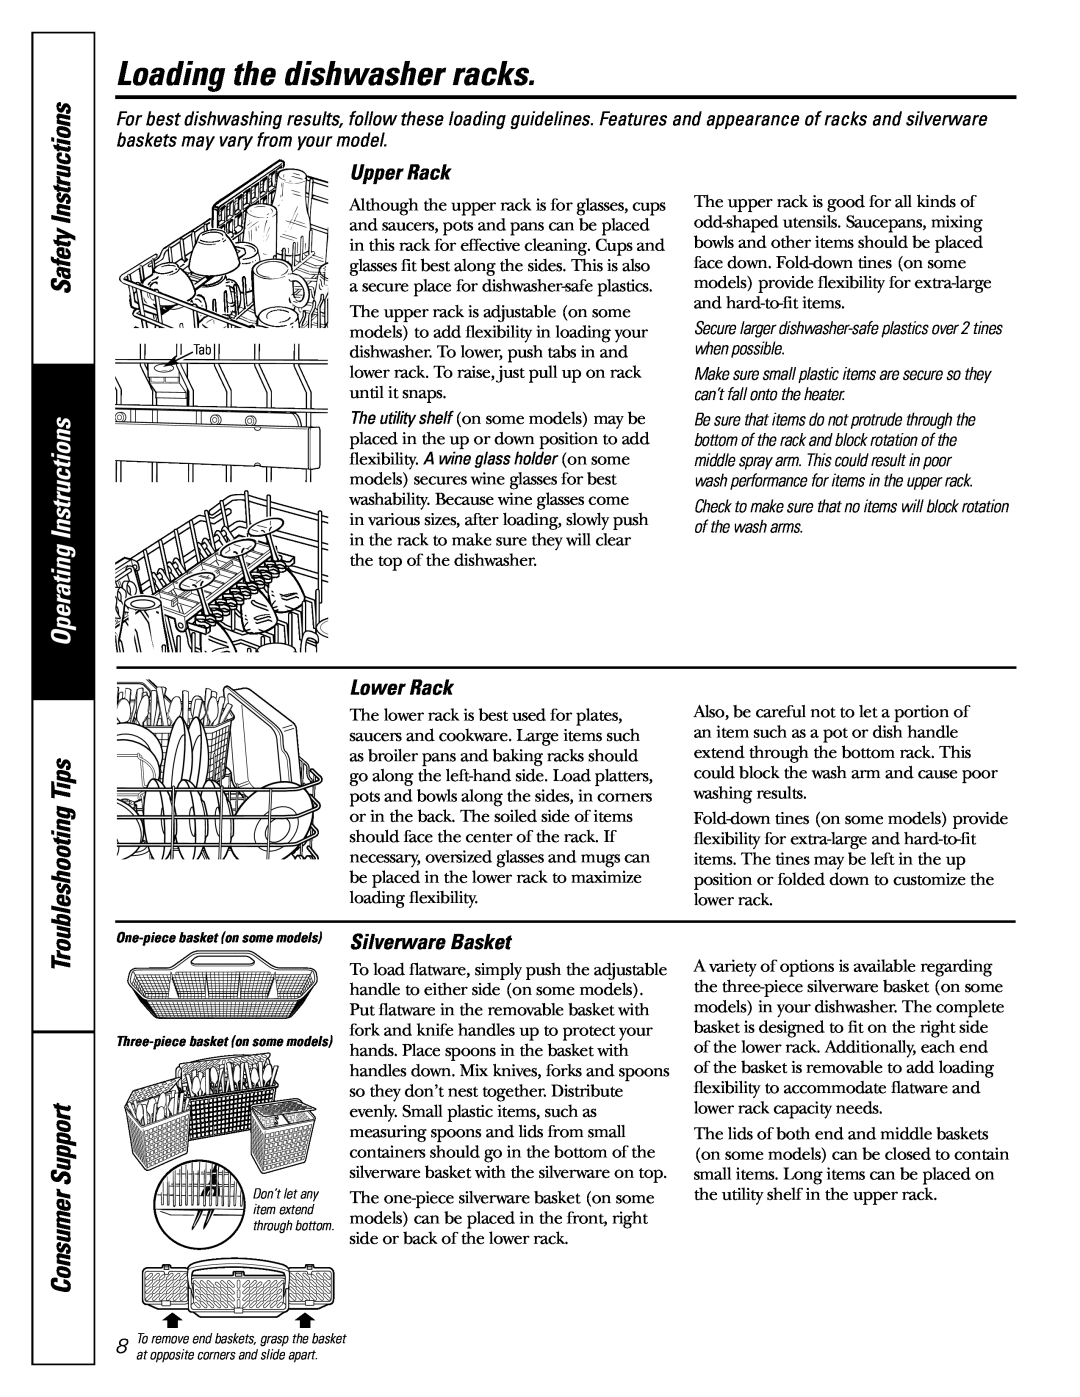 GE GSD6960, GSD6860 Safety, Upper Rack, Lower Rack, Silverware Basket, Operating Instructions, Troubleshooting Tips 